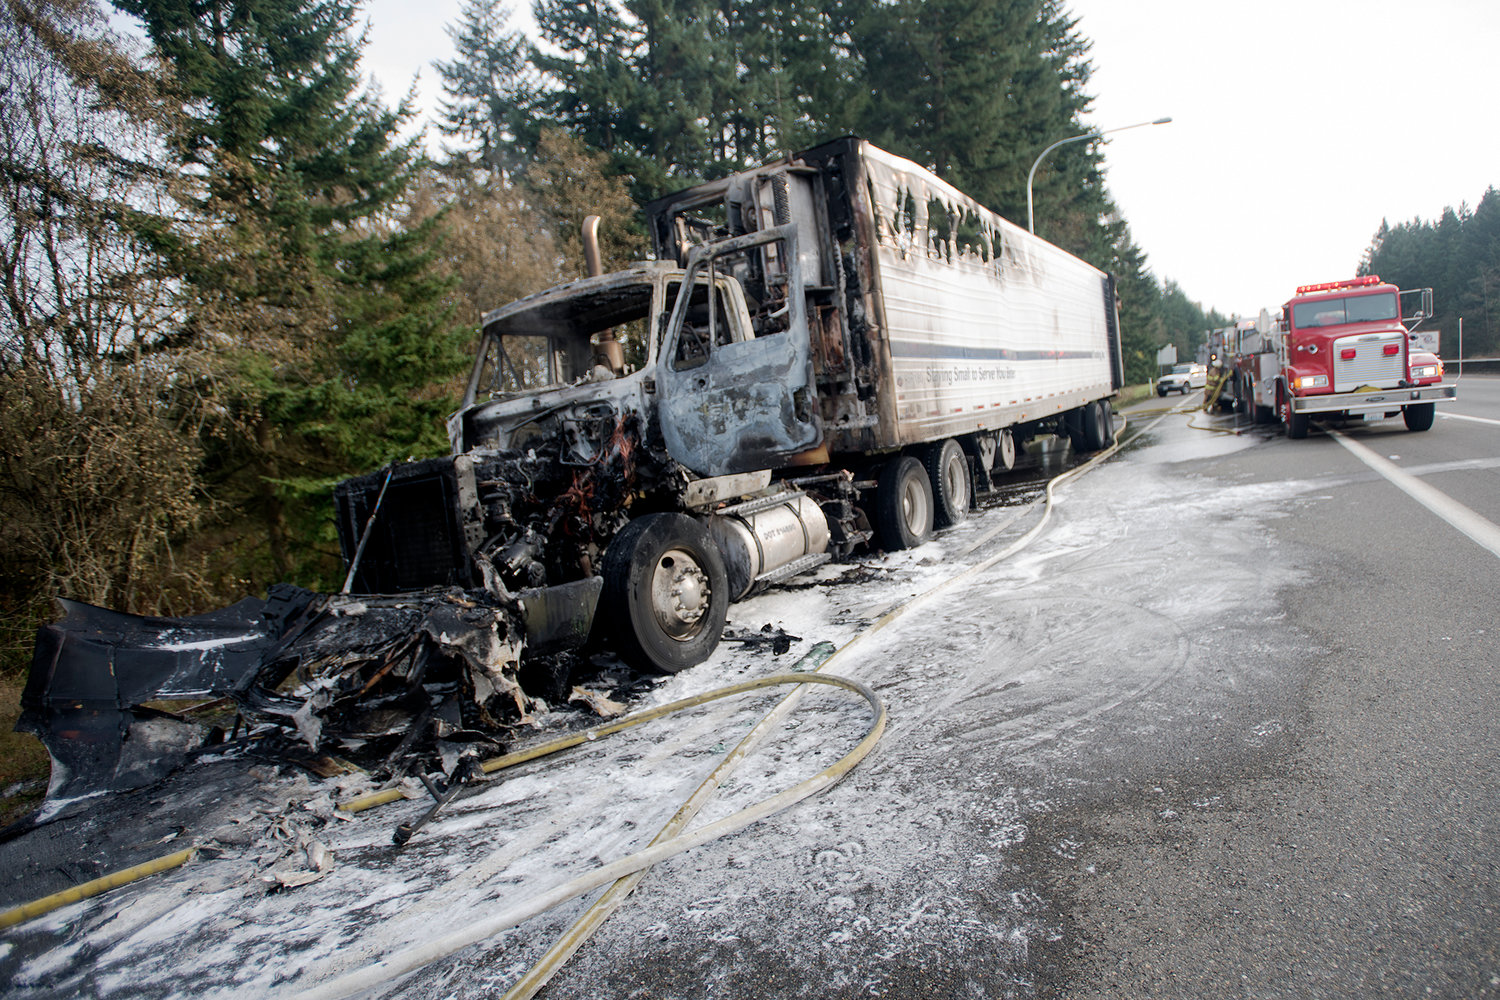 A charred semi truck that had caught fire along northbound Interstate 5 sits at exit 71 on Tuesday afternoon in Napavine. No one was injured in the blaze, which fire officials believed began with the refrigerator unit in the trailer.